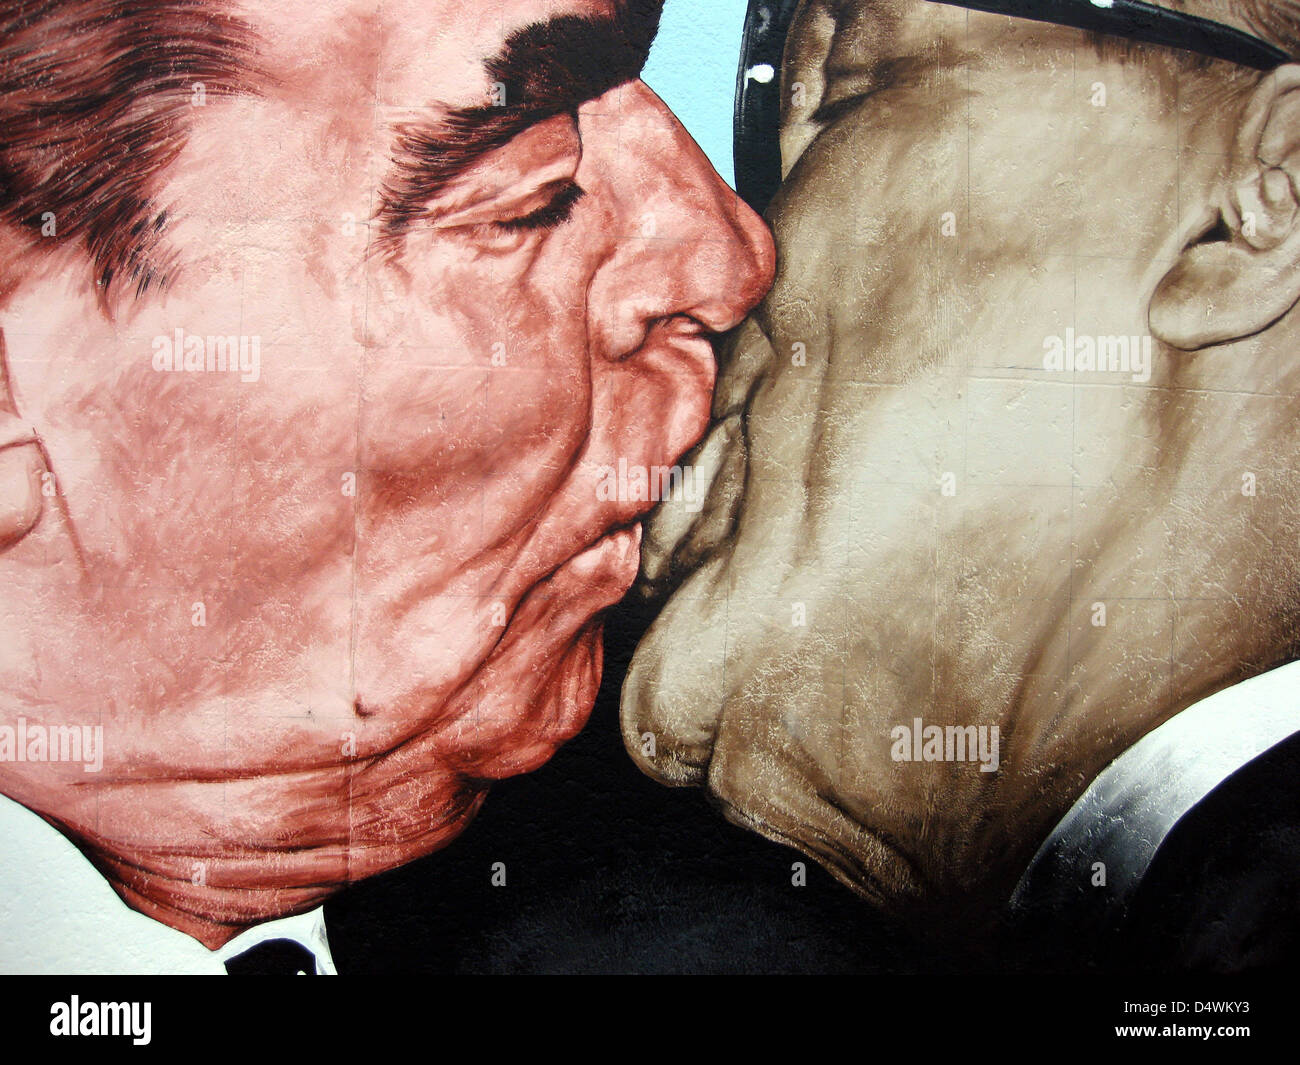 The artwork by Dimitri Vrubel, 'Der Bruderkuss' (The Socialist Fraternal Kiss), is pictured on a section of the Berlin Wall at the East Side Gallery on Mühlenstrasse in Berlin, Germany, in August 2009. The most famous artwork of the East Side Gallery shows the socialist fraternal kiss between SED General Secretary Erich Honecker and General Secretary of the Soviet Union Leonid Brezhnev. The concrete parts of the Berlin Wall between Ostbahnhof and Warschauer Strasse were painted by international artists after the opening of the inner-German border in November 1989. Photo: Dieter Palm Stock Photo